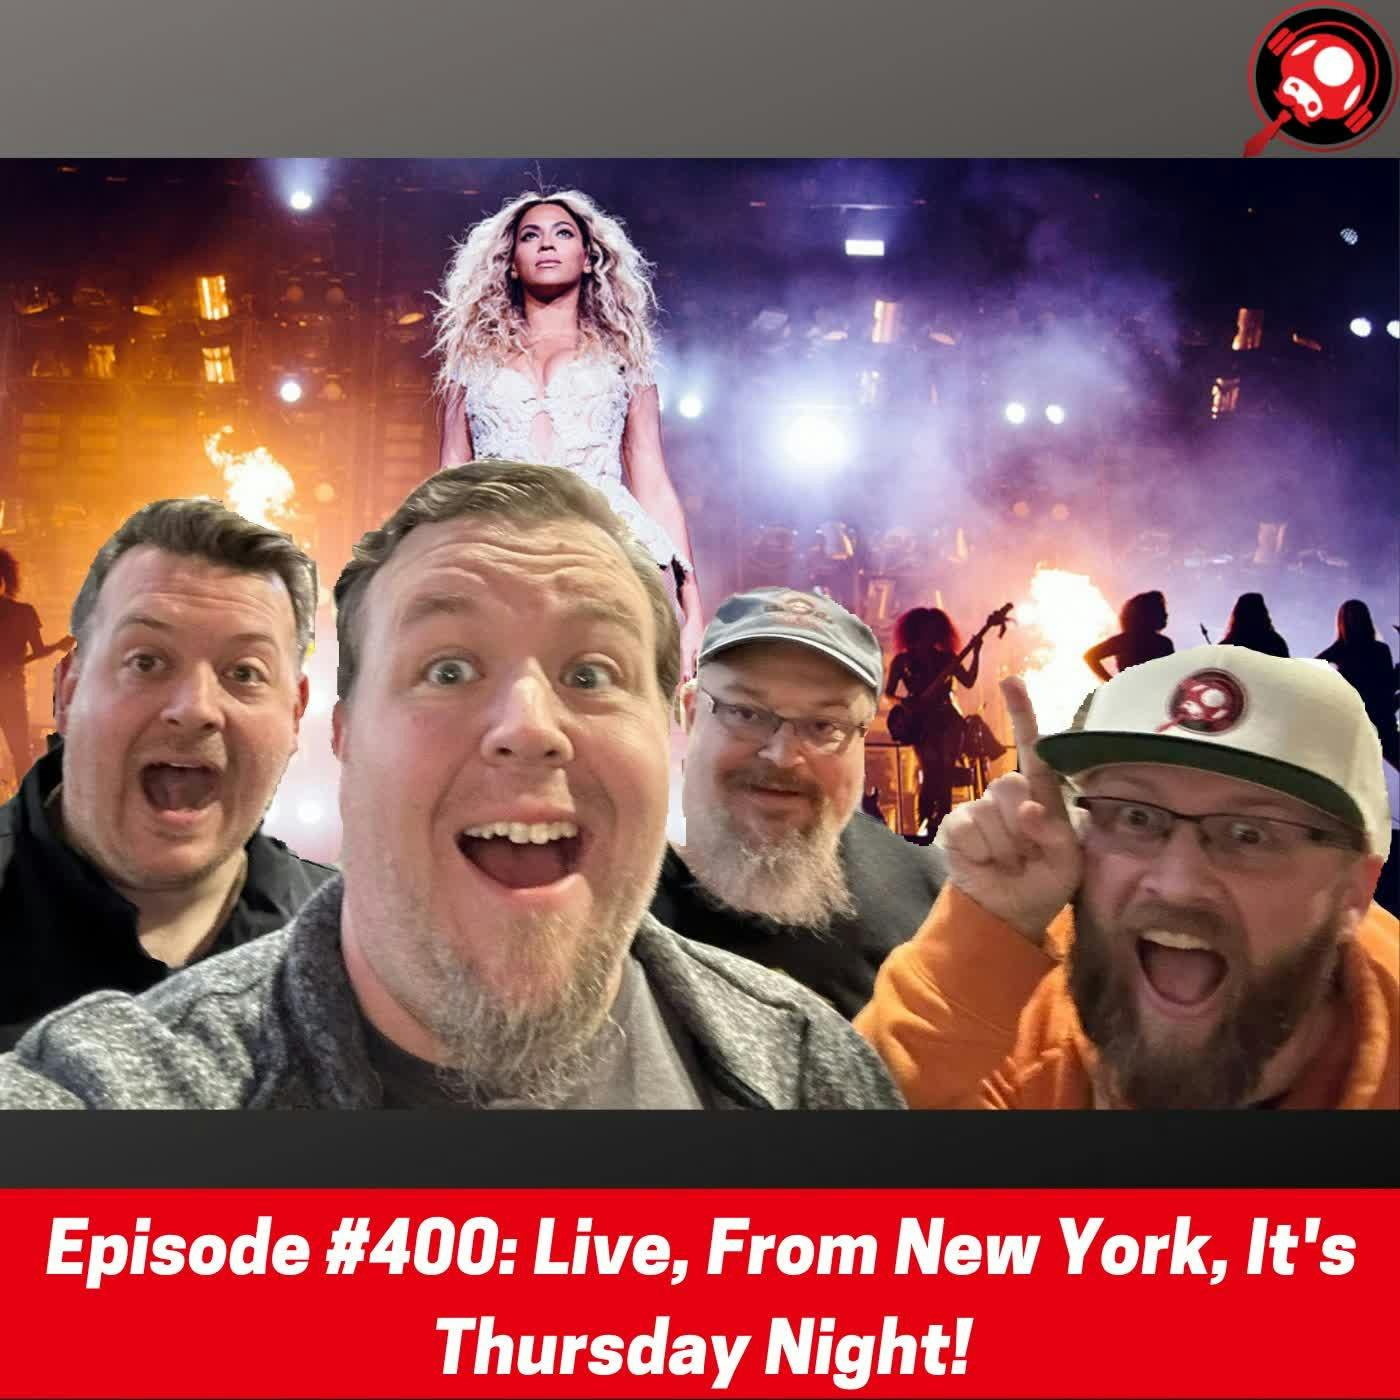 #400: Live, From New York, It's Thursday Night!